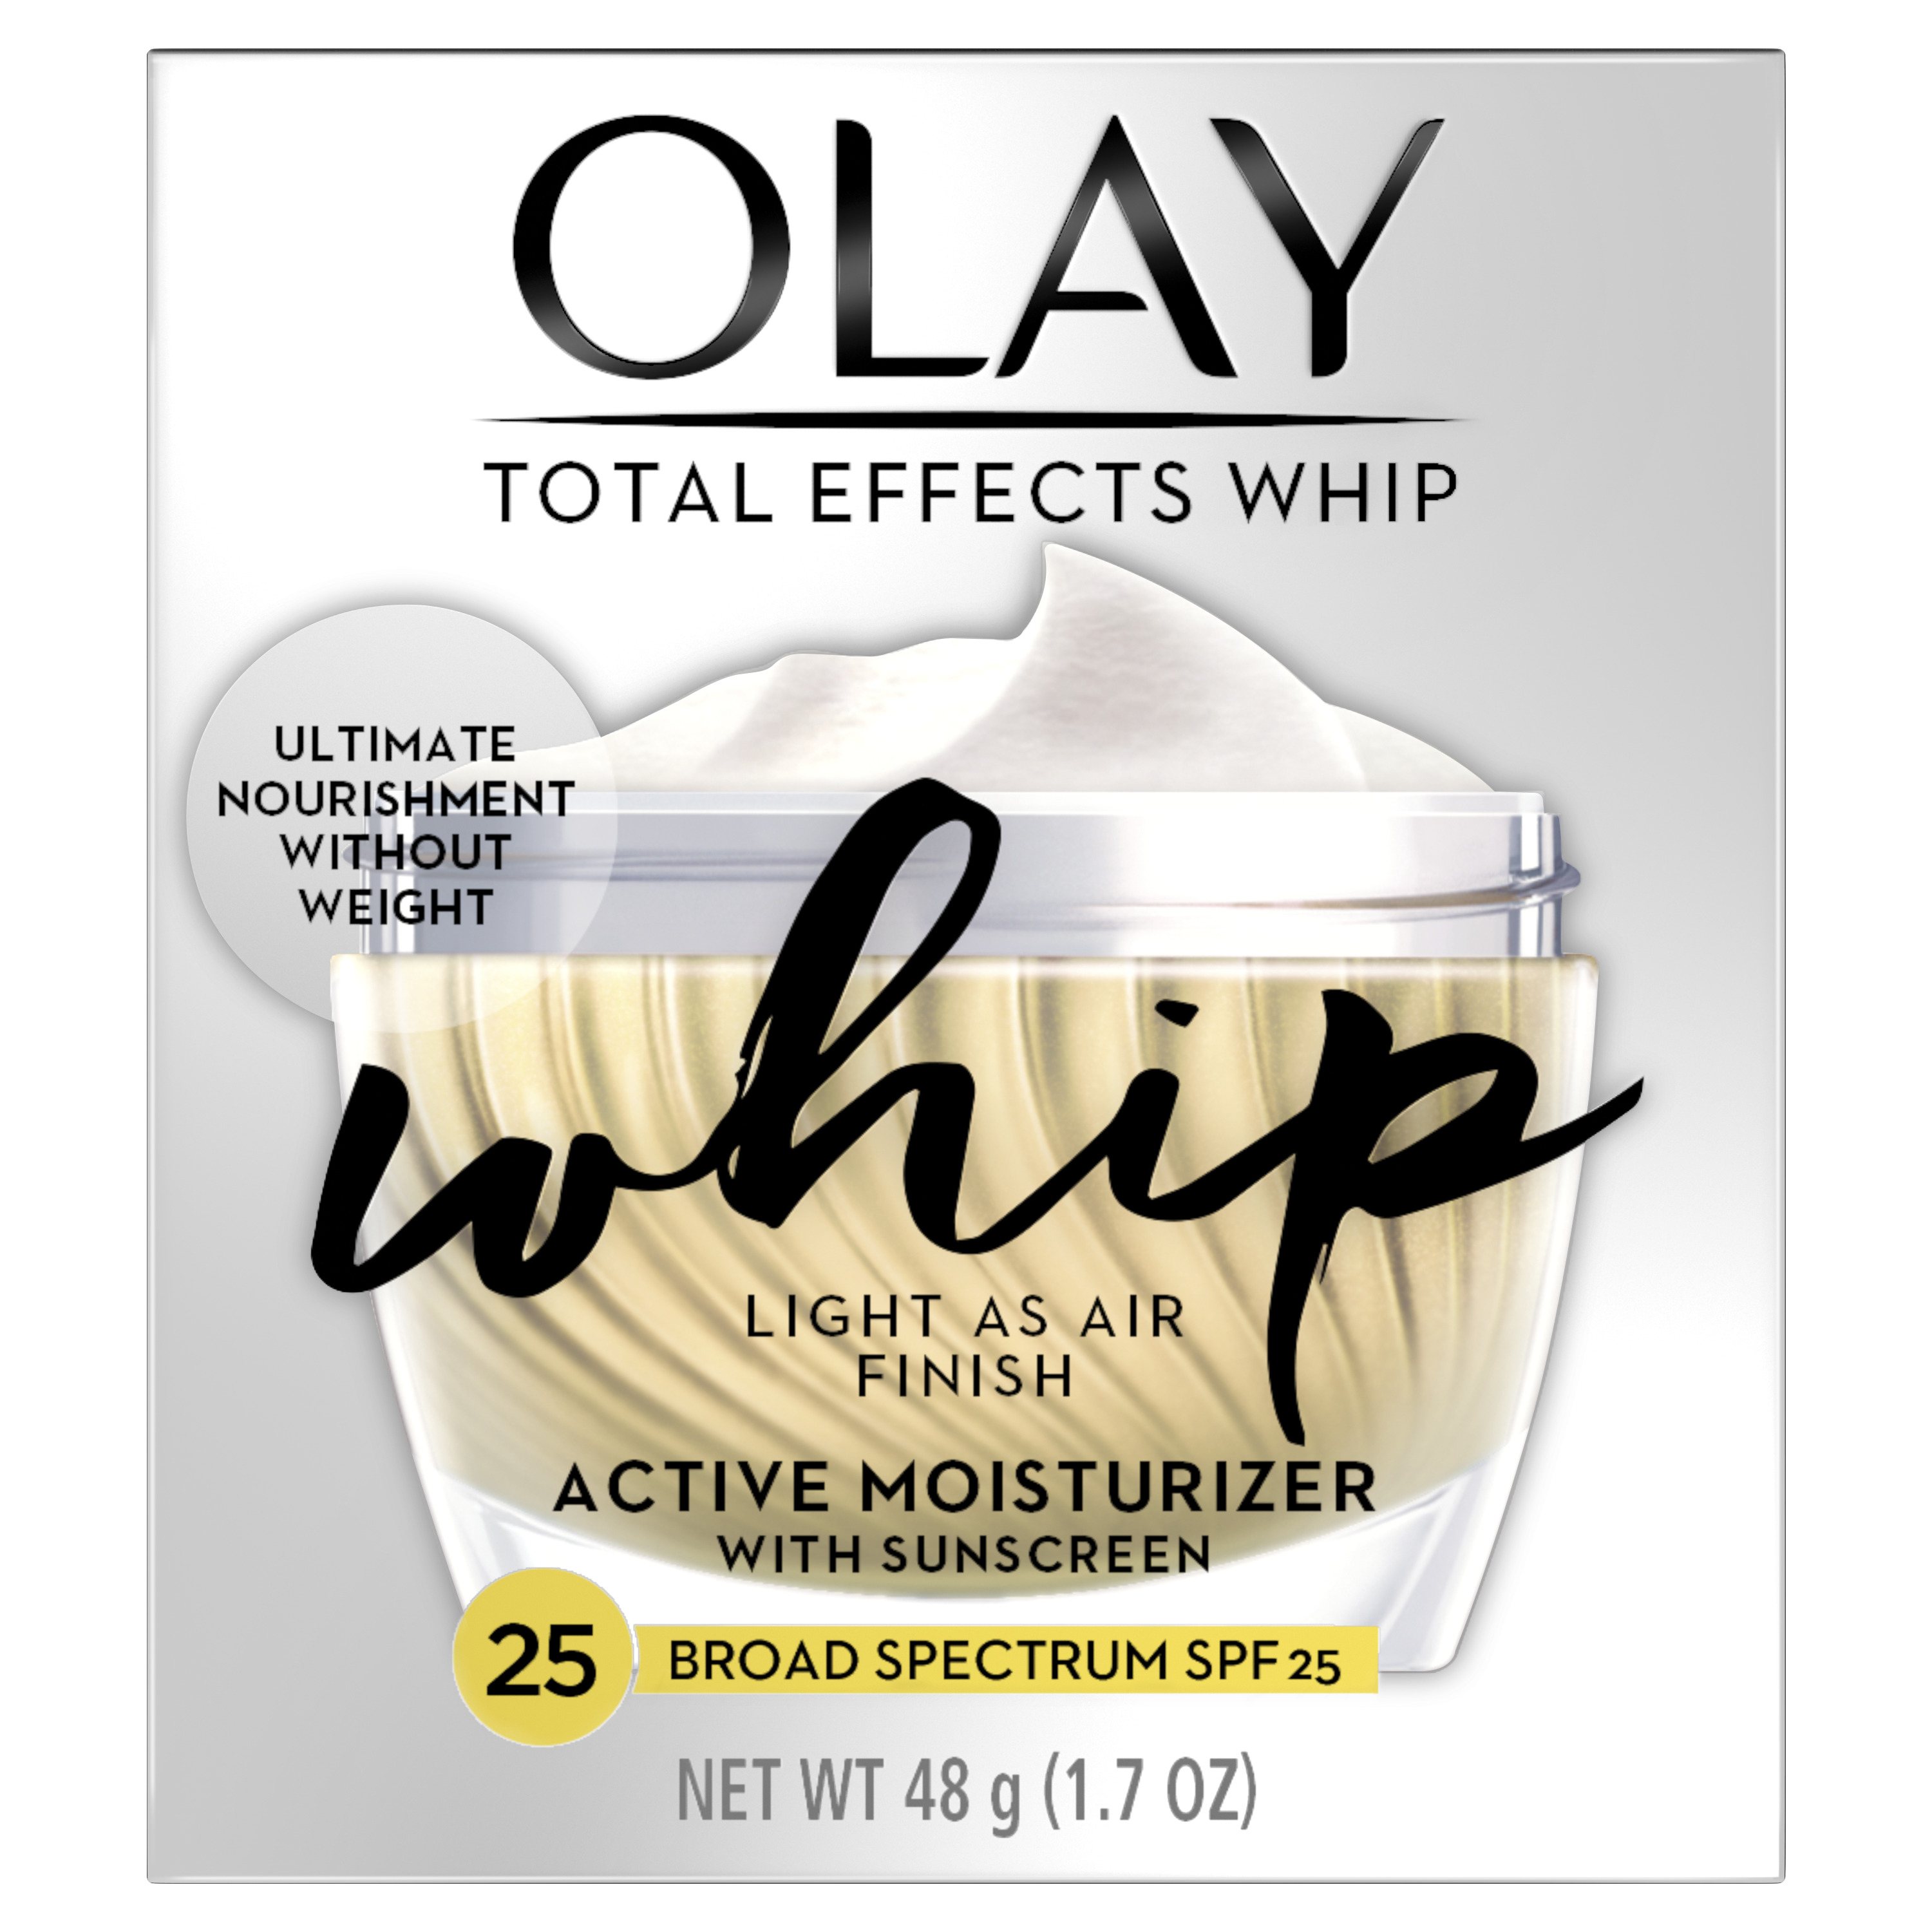 Olay Total Effects Whip Face Moisturizer SPF 25, 1.7 oz - image 4 of 11